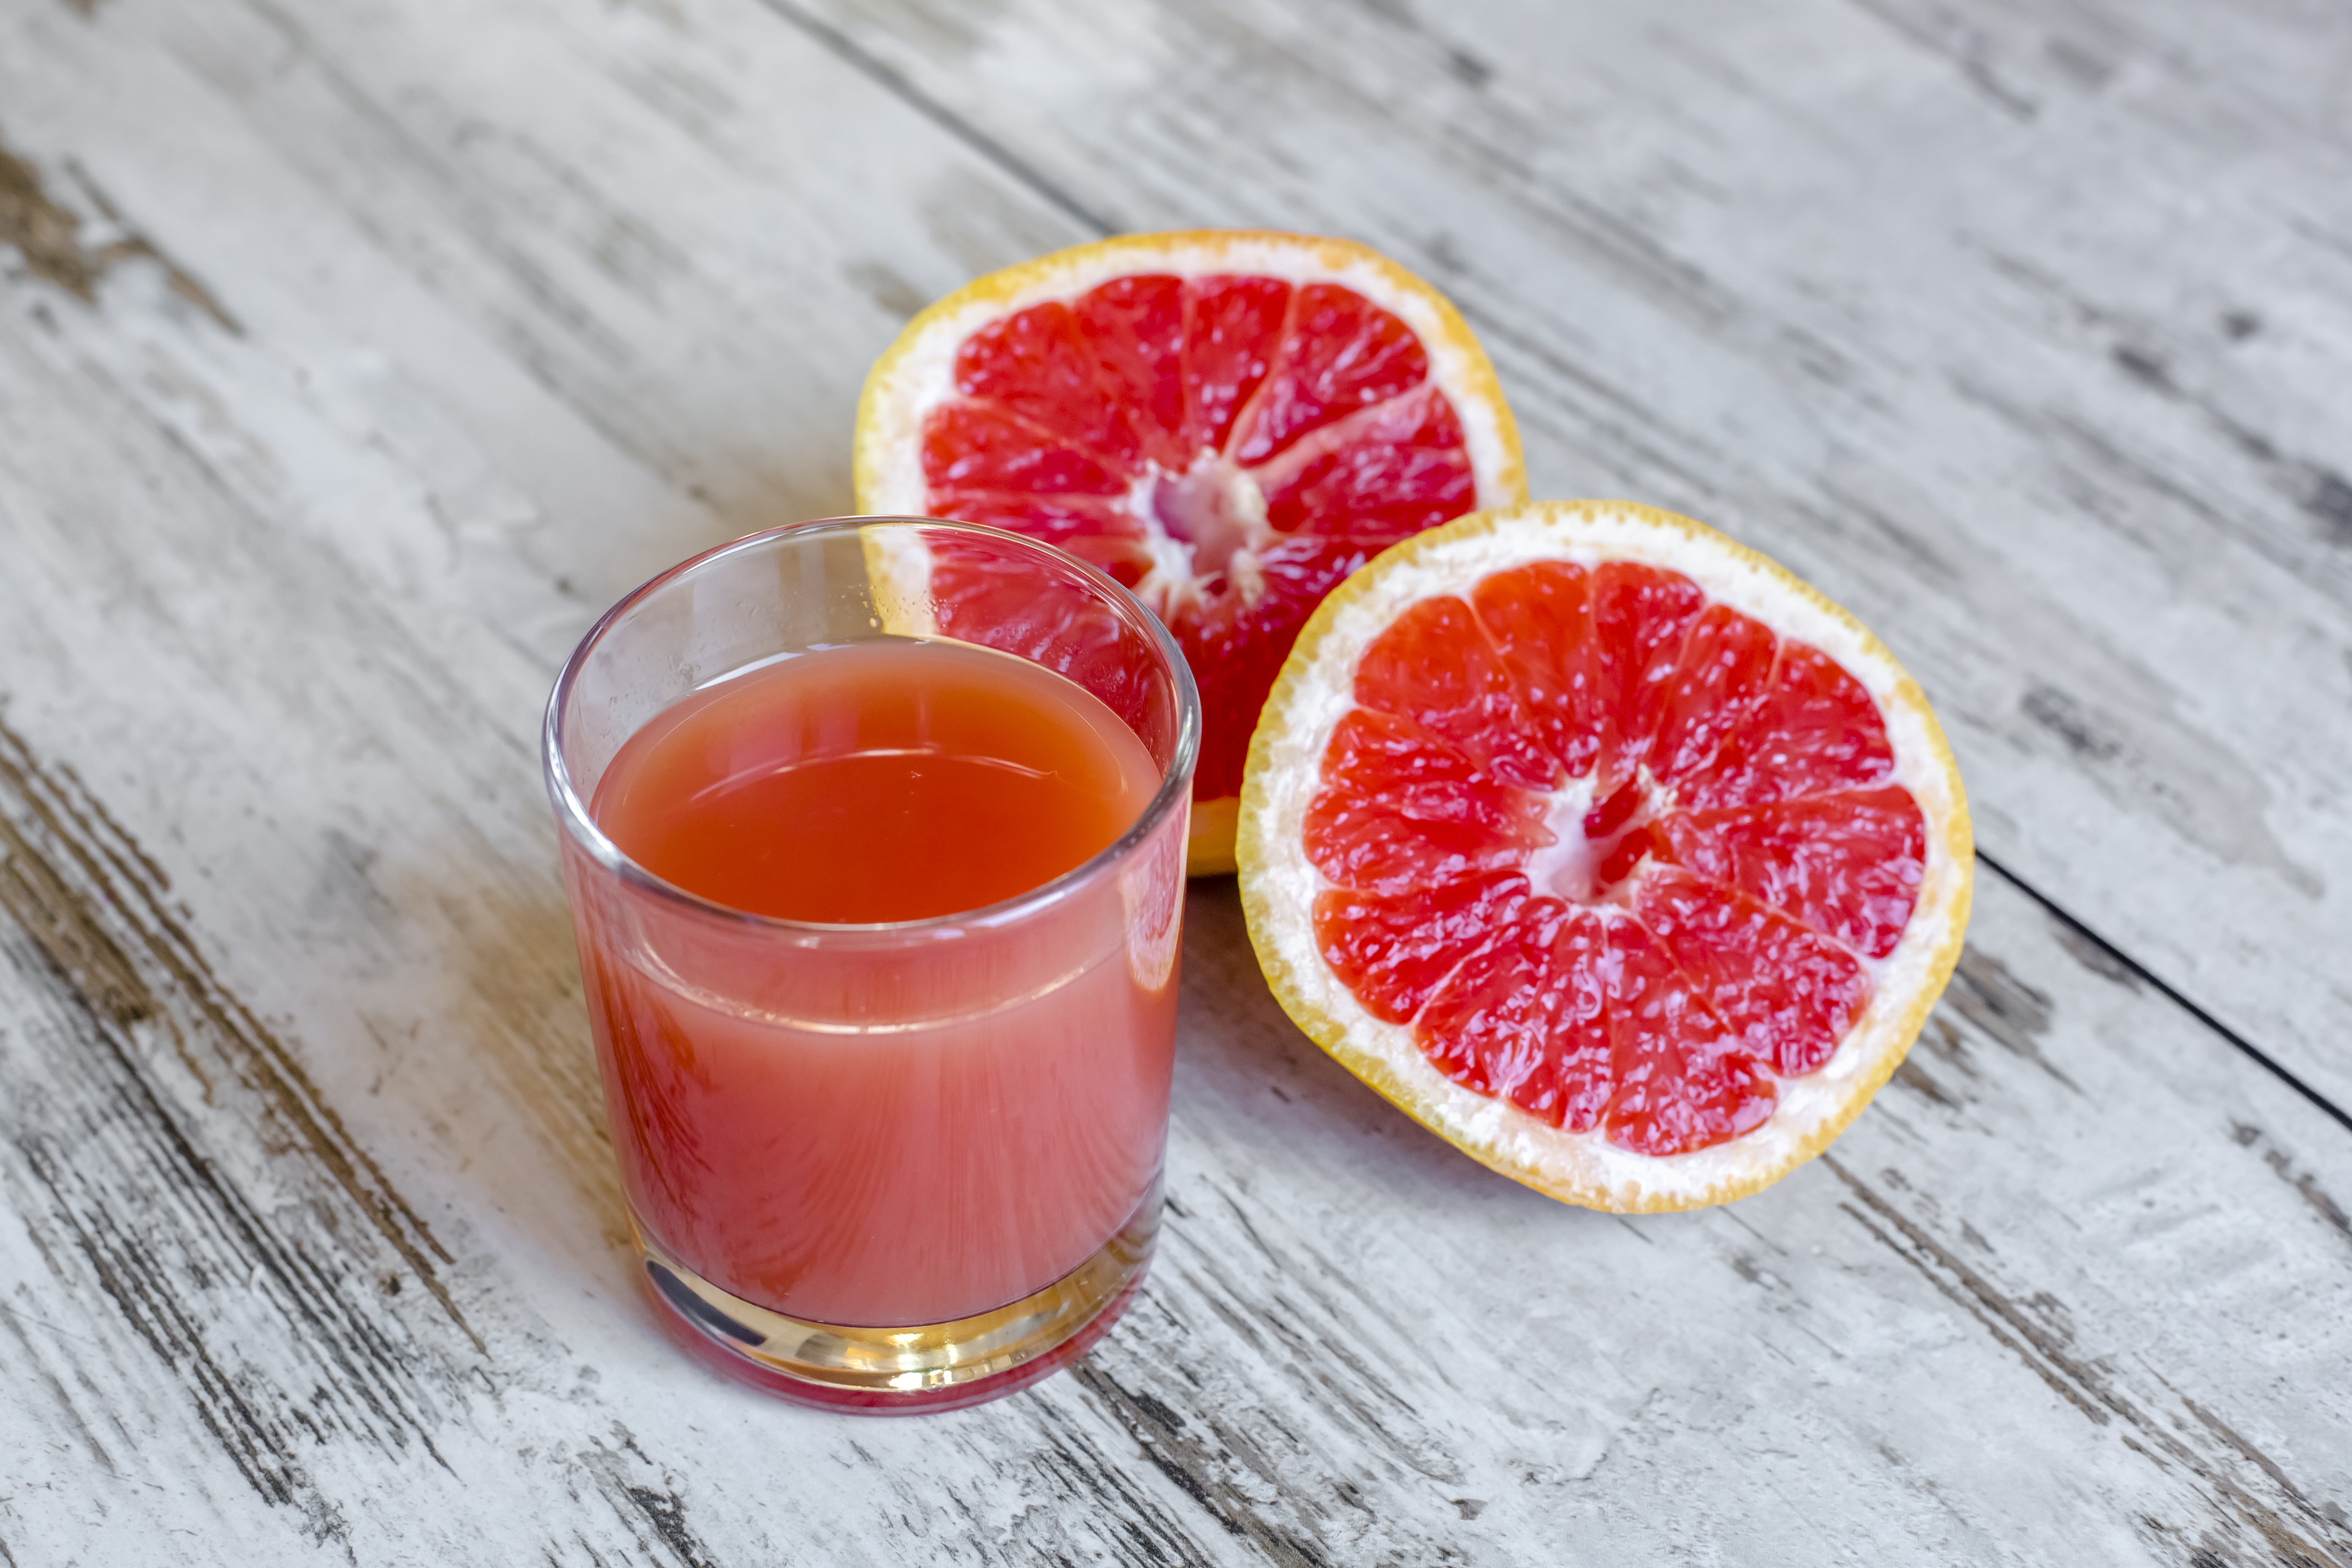 Nutritionists say grapefruit and other cirtrus fruits like lemons and oranges are great for your child